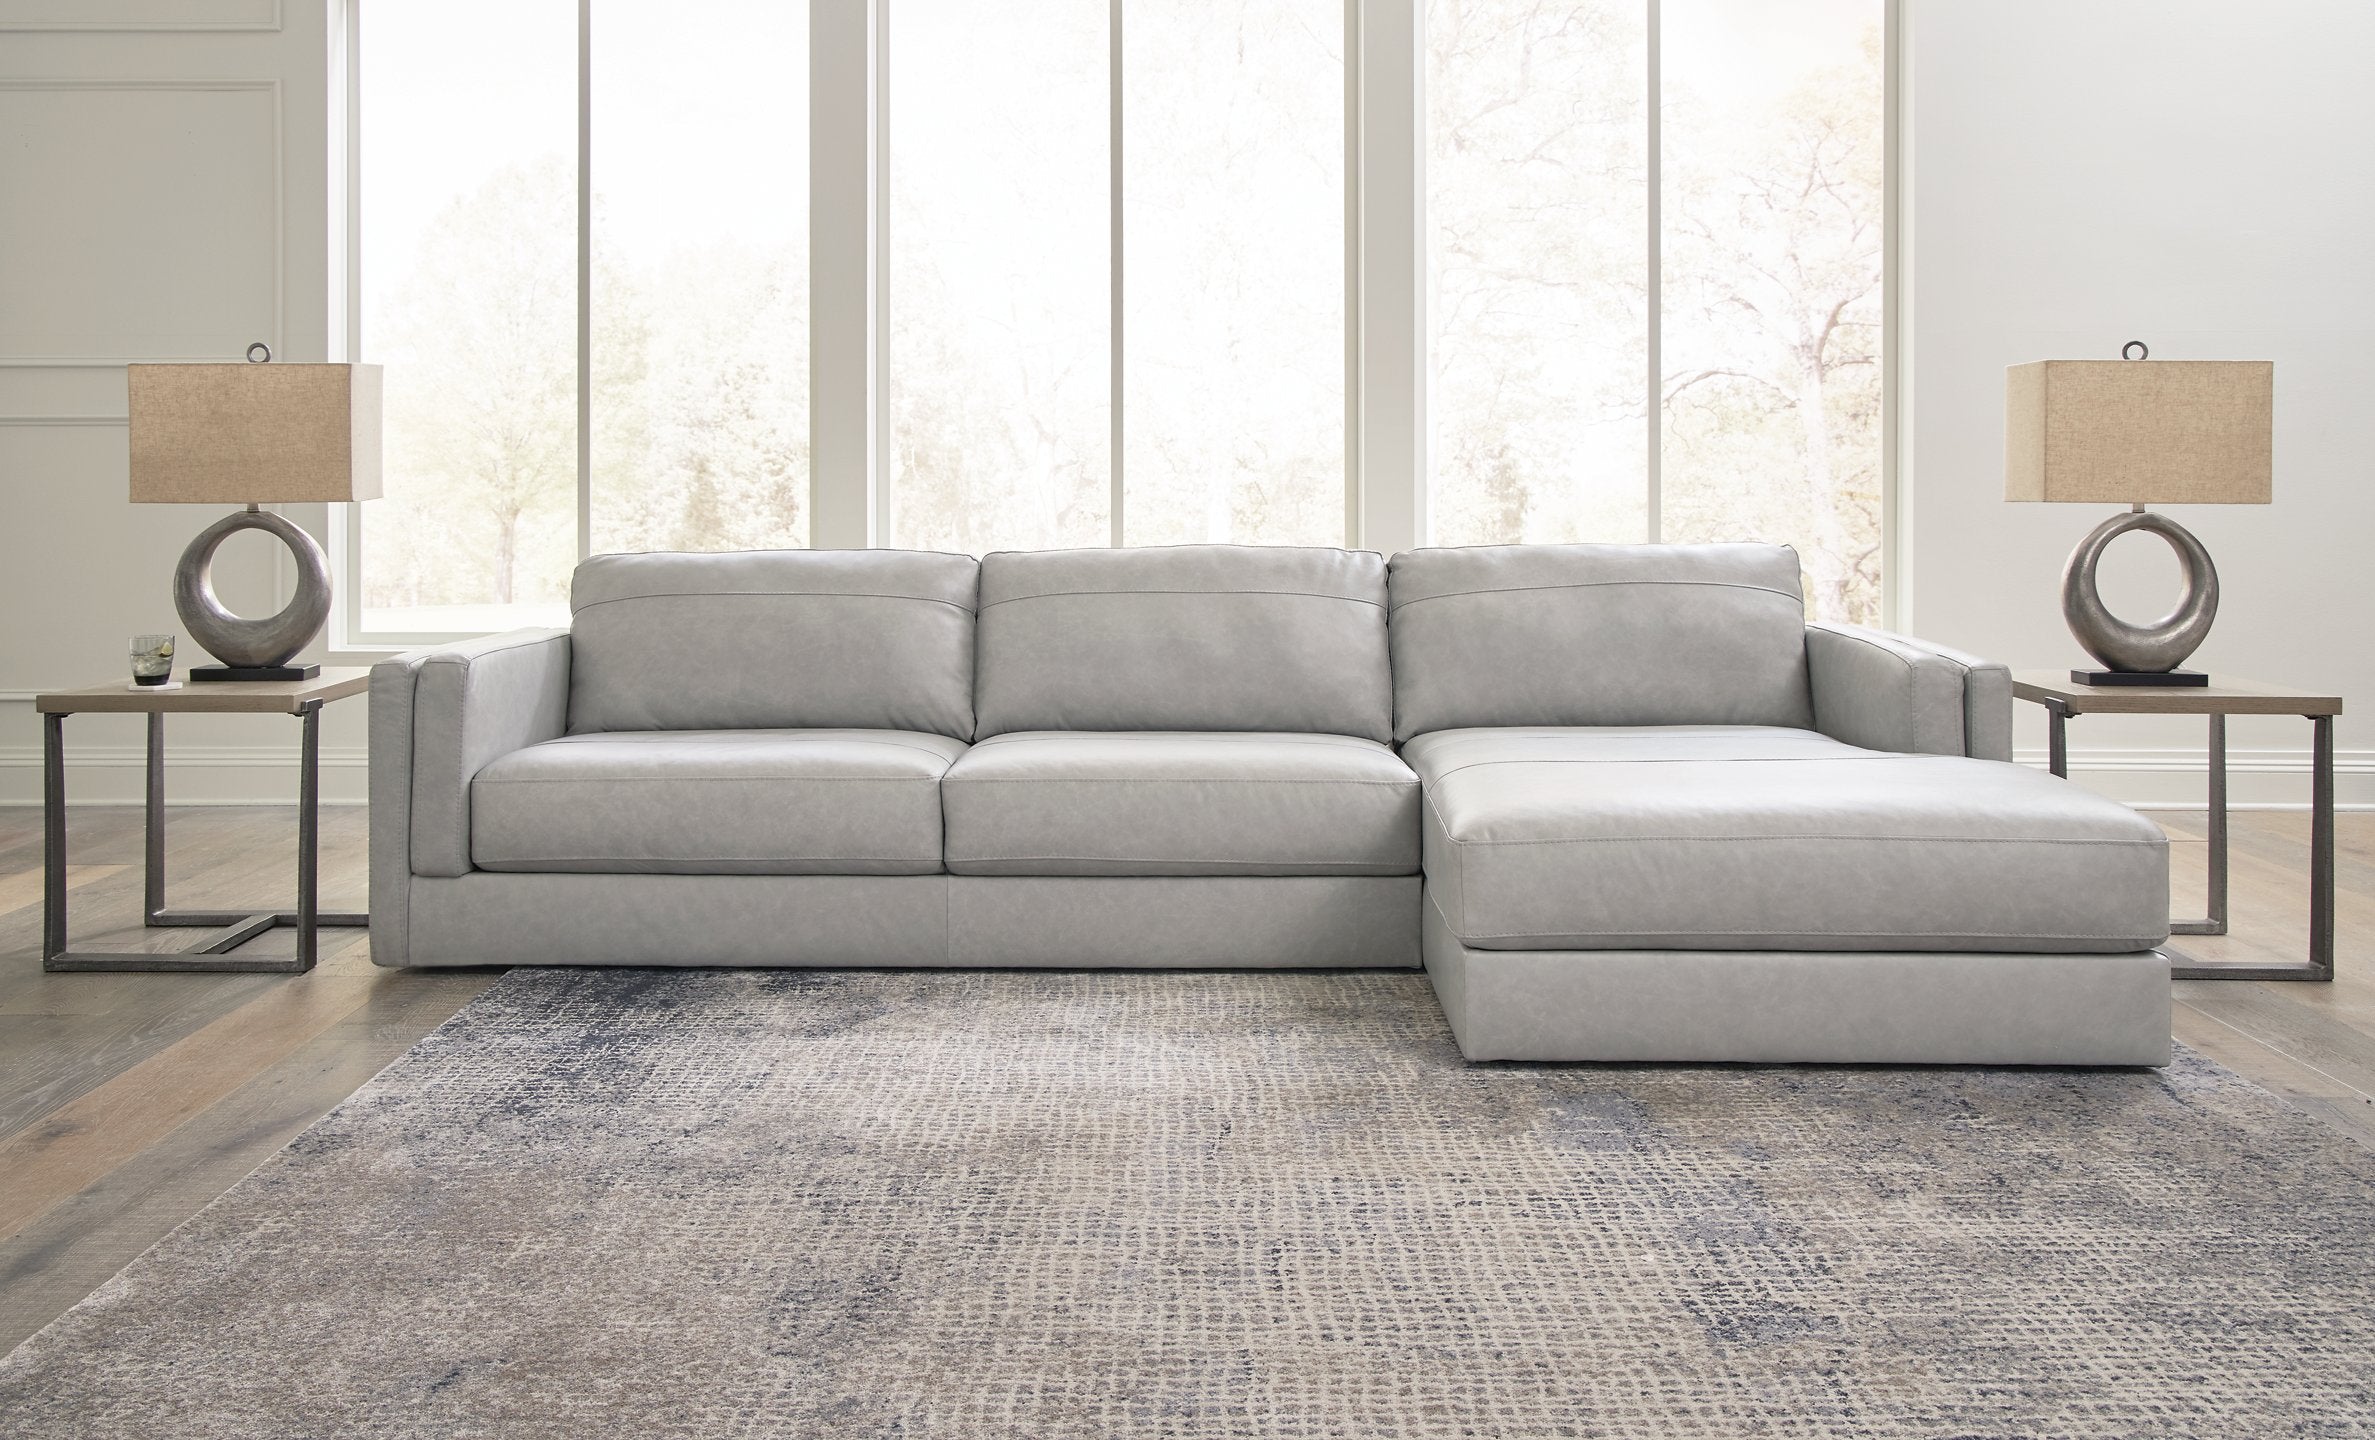 Amiata Sectional with Chaise